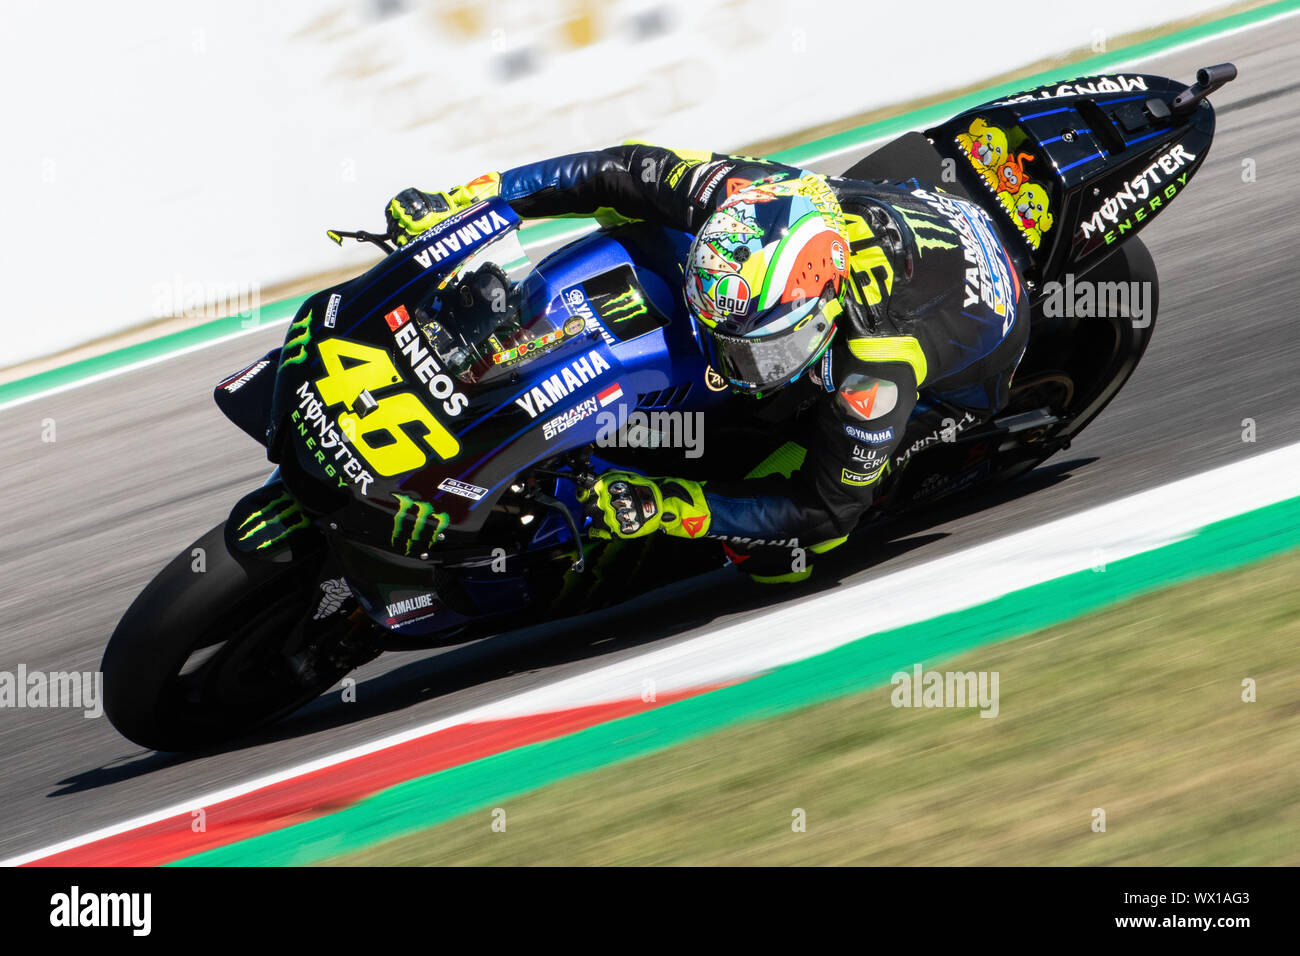 VALENTINO ROSSI, ITALIAN MOTOGP RIDER NUMBER 46 (WITH SPECIAL CELEBRATIVE HELMET FOR MISANO) FOR YAMAHA MONSTER TEAM  during Saturday Free Practice & Stock Photo